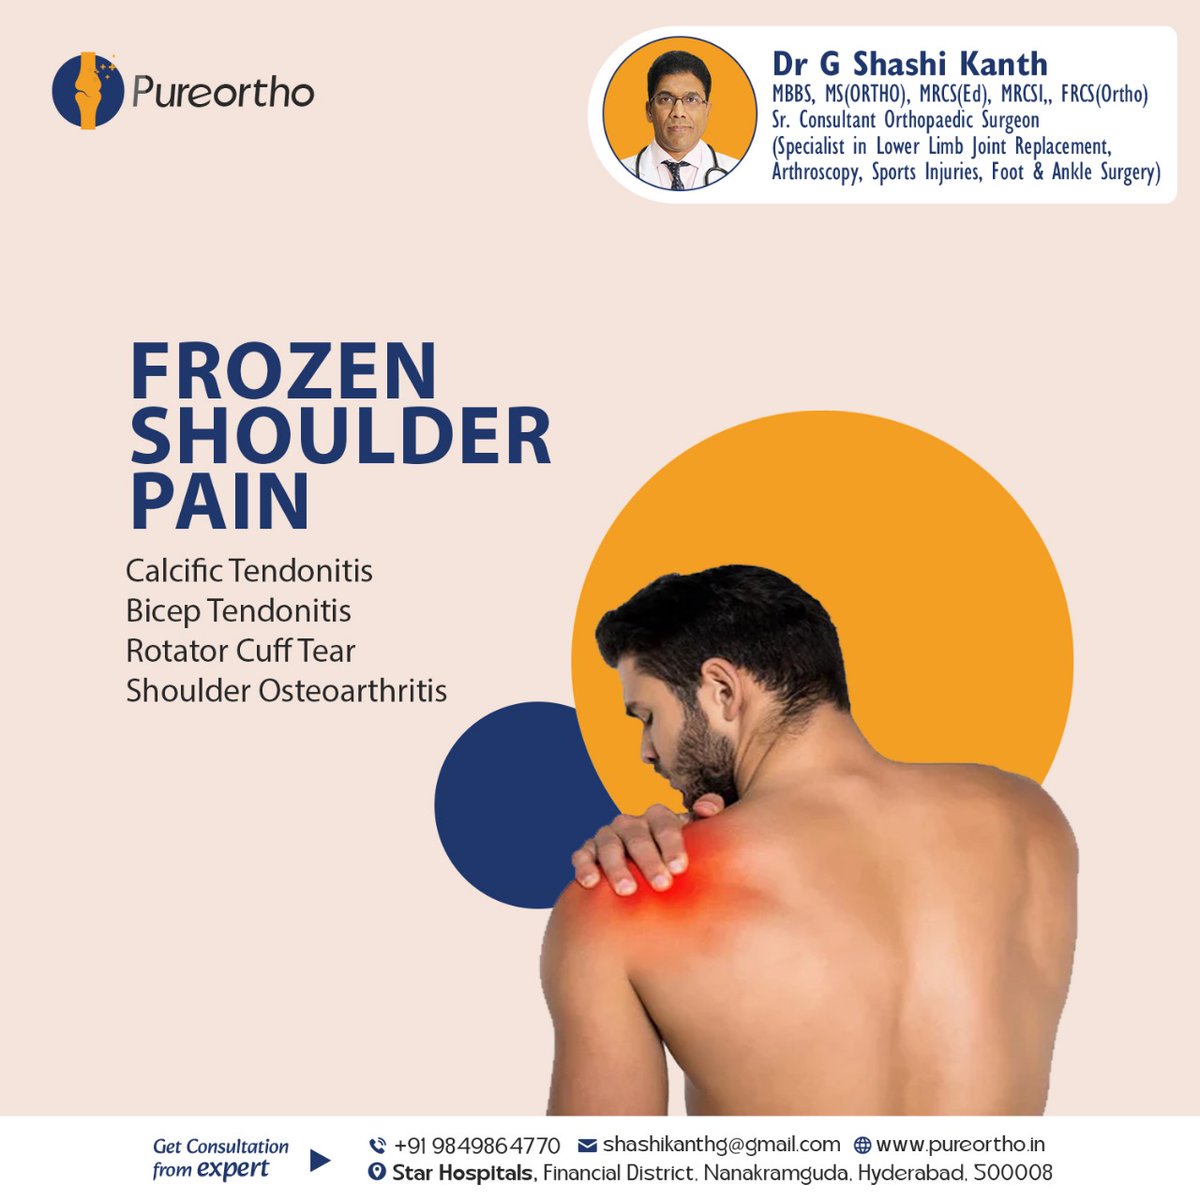 🌟 Say goodbye to Frozen Shoulder Pain, Calcific Tendonitis, Bicep Tendonitis, Rotator Cuff Tears, and Shoulder Osteoarthritis. Our expert care, your pain-free journey

#FrozenShoulderNoMore #OrthopedicHealing #TendonitisFree #RotatorCuffRecovery #PainFreeLiving #OrthoExperts